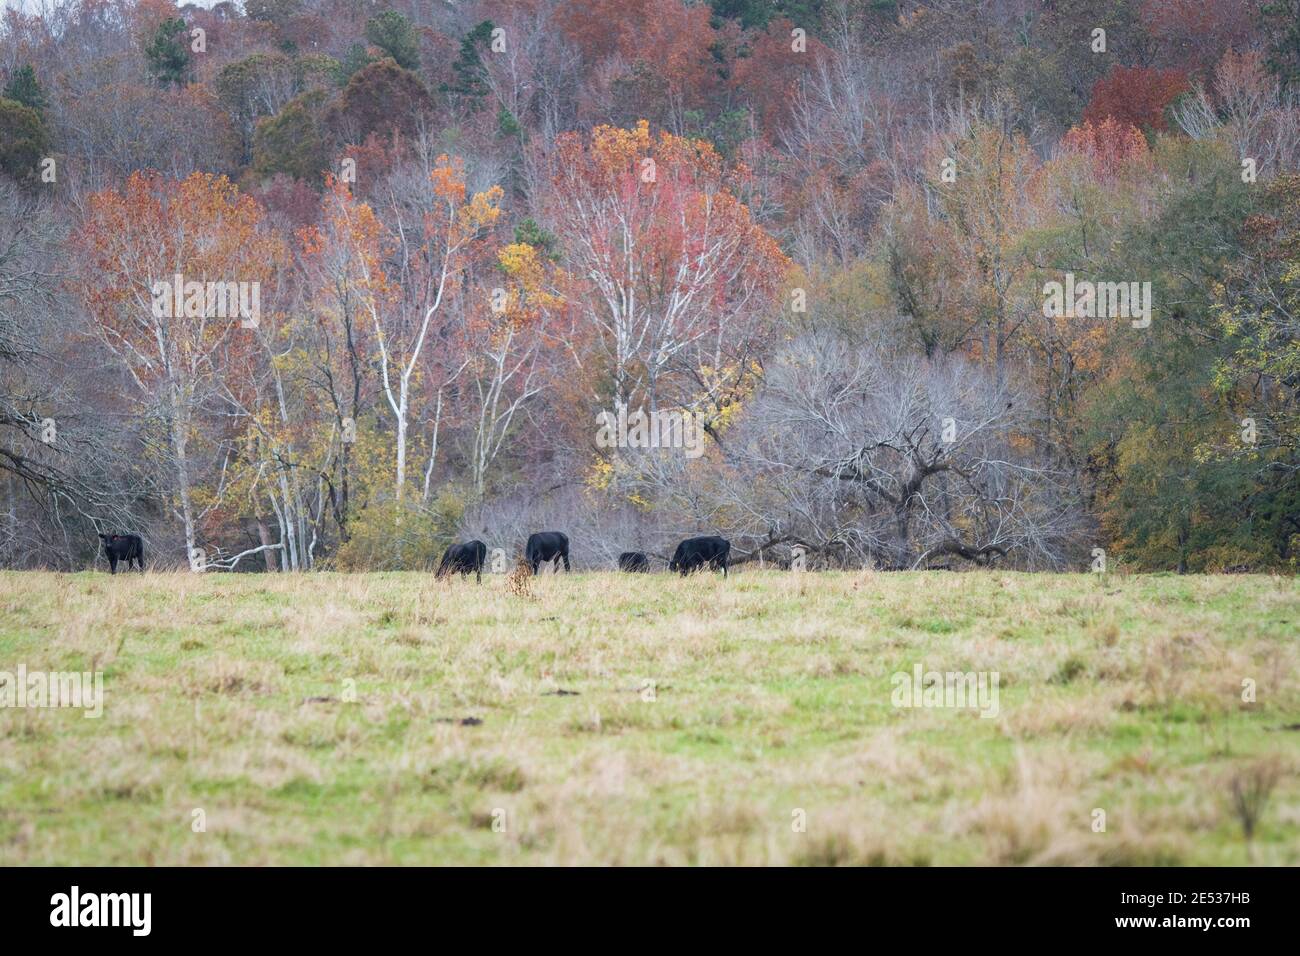 Angus beef cattle grazing in an autumn pasture with colorful hillside of trees in the background. Stock Photo